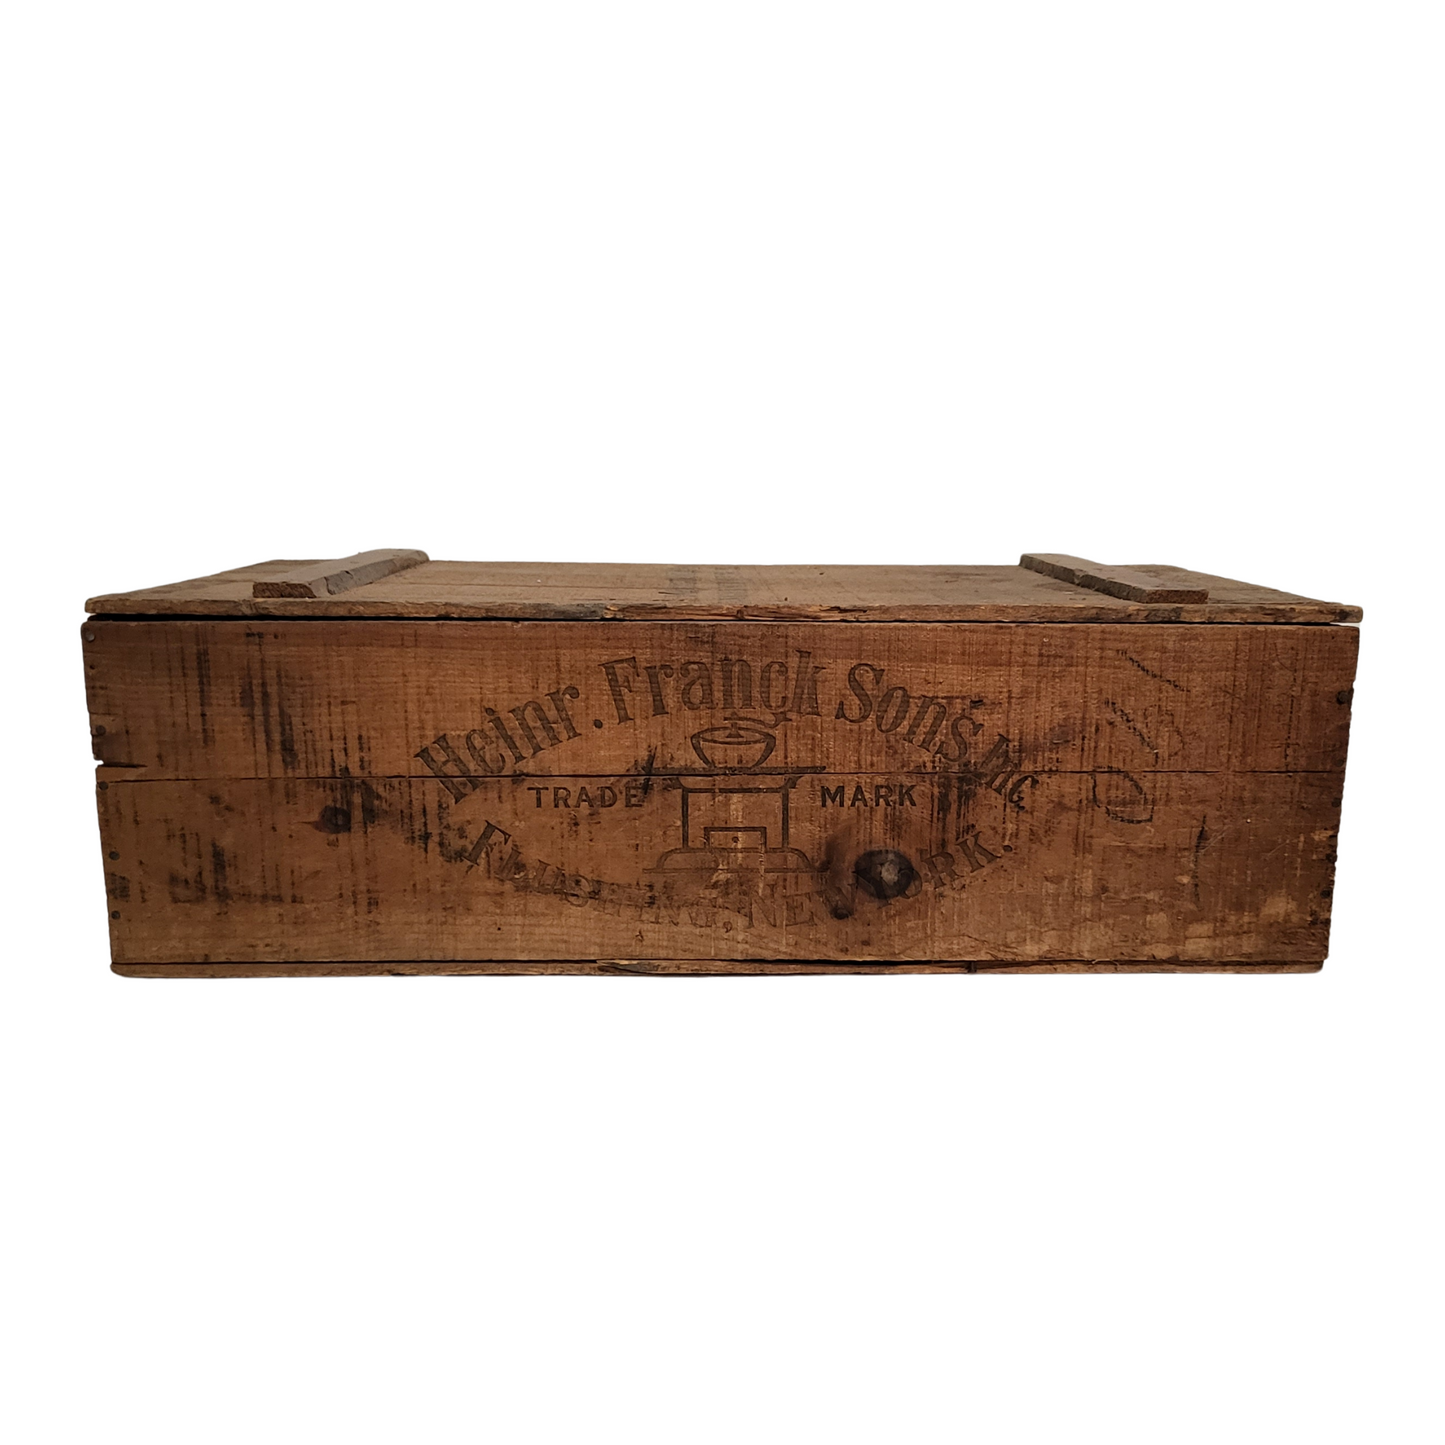 Antique Coffee Crate by Heinrich Franck & Sons Flushing, NY Crate - Full of Chicory Seasoning Tubes